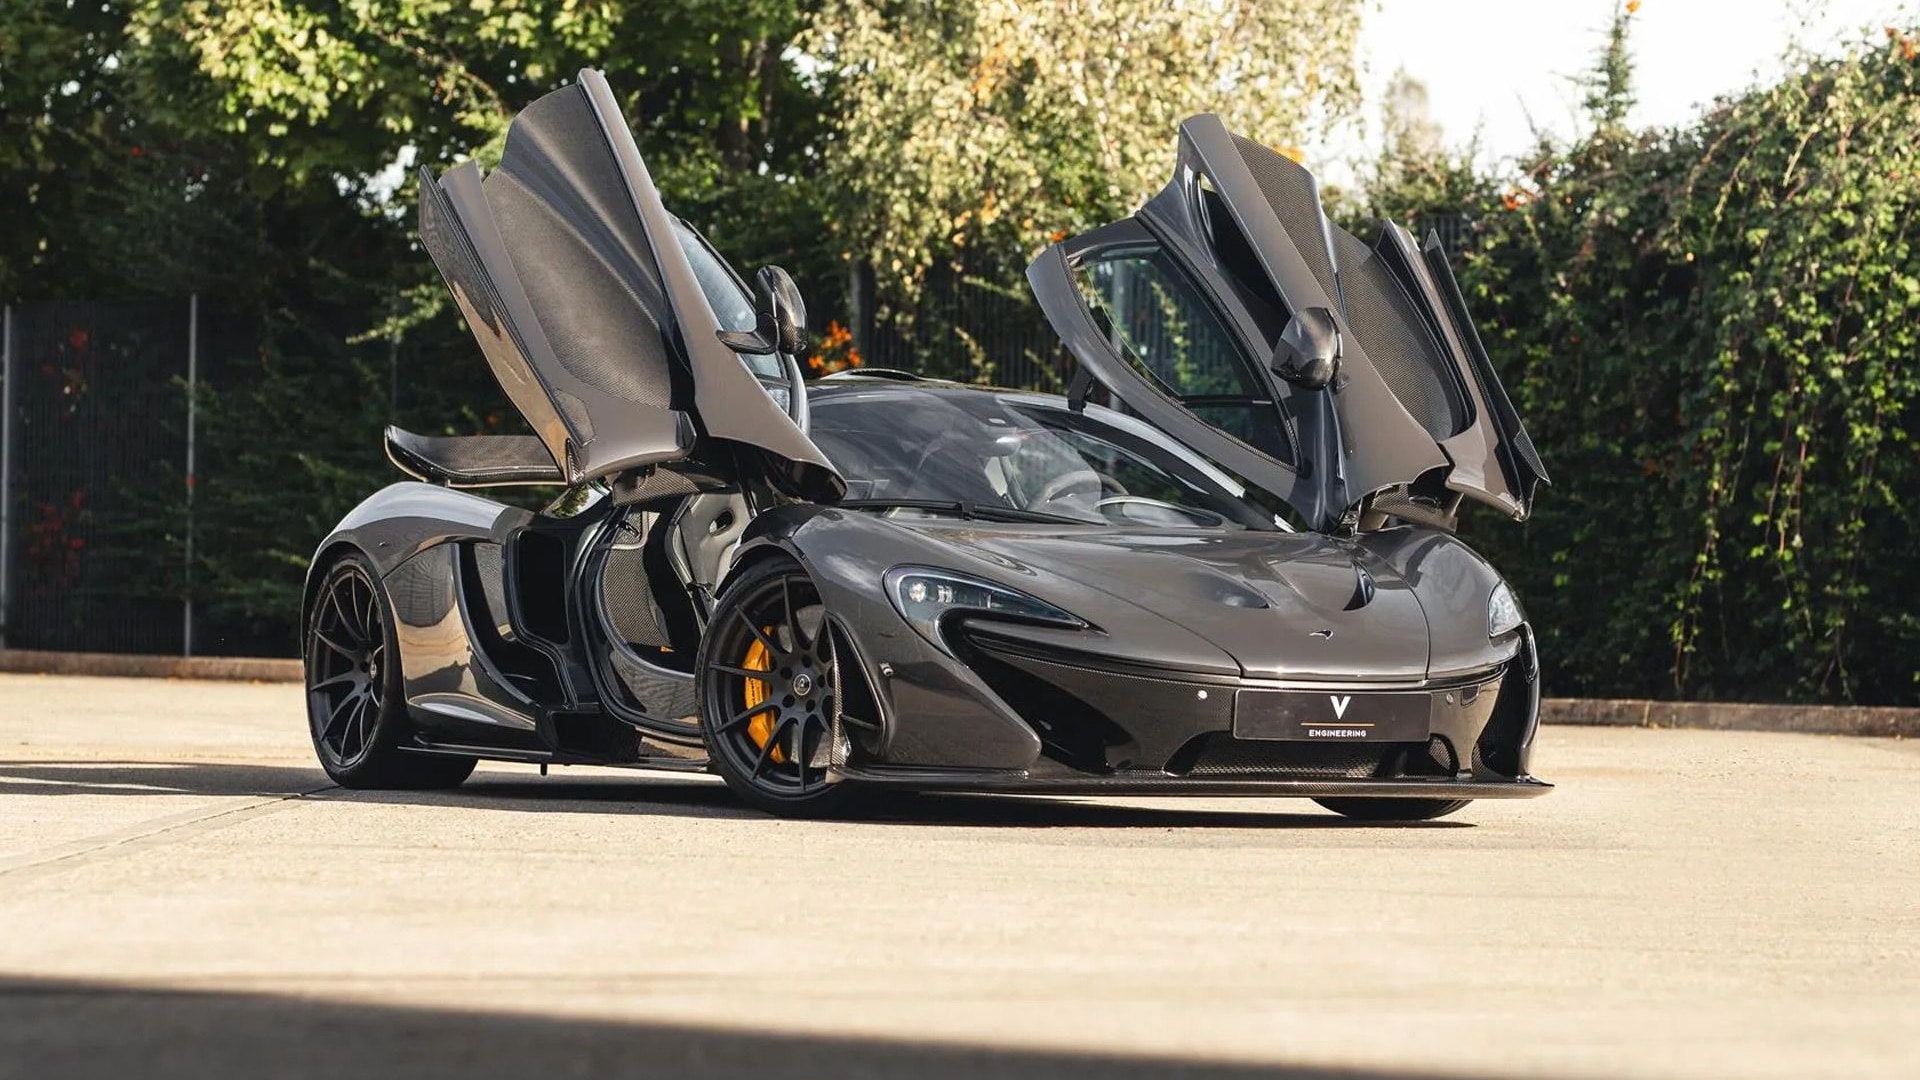 McLaren P1 first owned by Jenson Button - Photo credit: V Management/Piston Heads